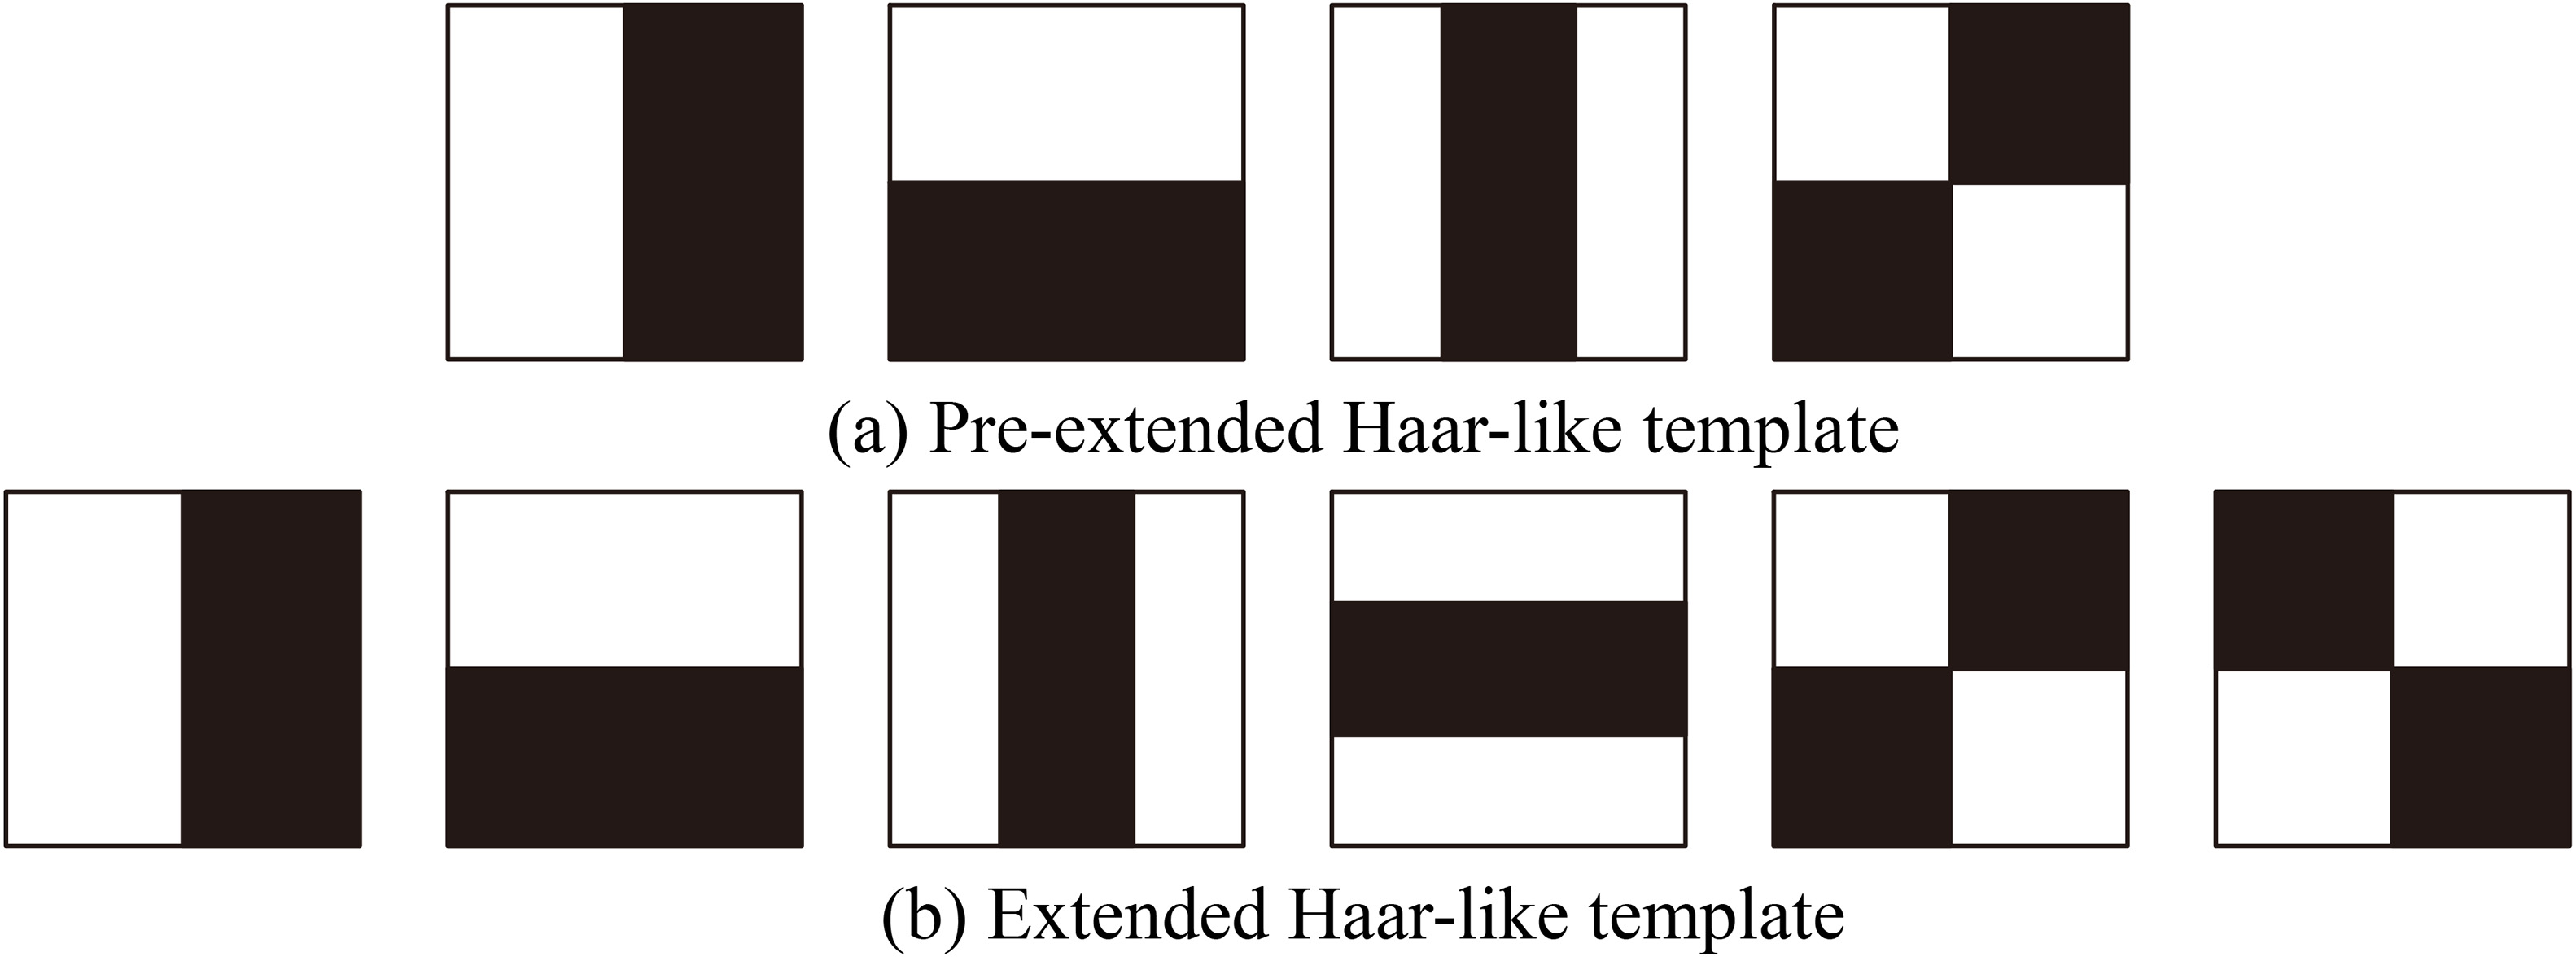 Comparison of Haar-like templates before and after expansion.